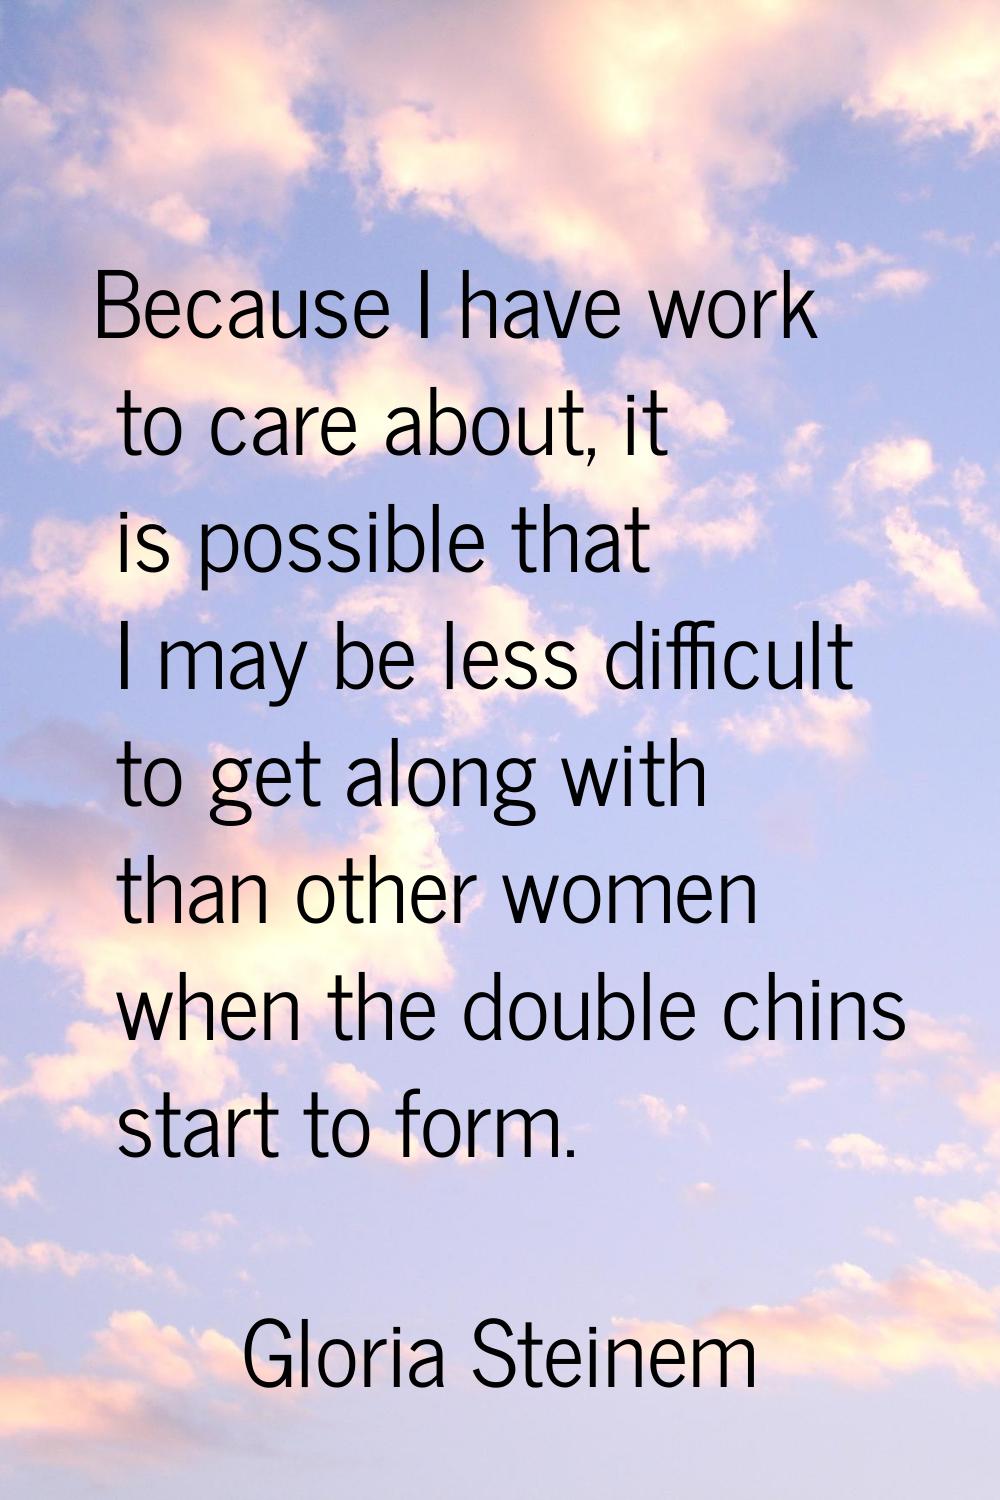 Because I have work to care about, it is possible that I may be less difficult to get along with th